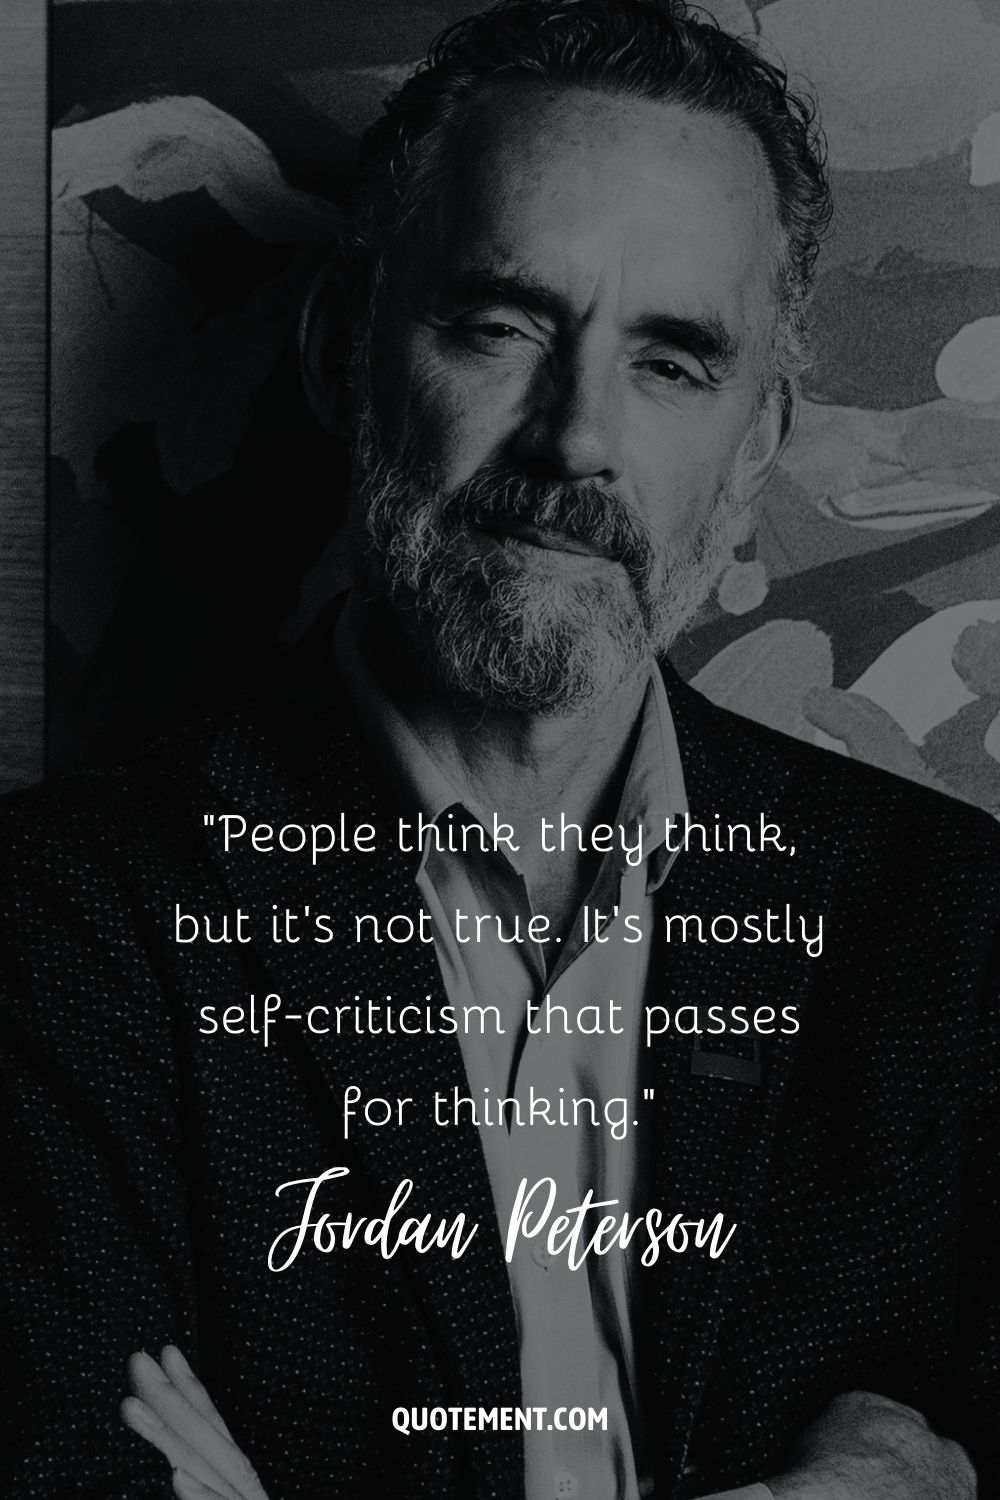 Jordan Peterson quote about thinking.